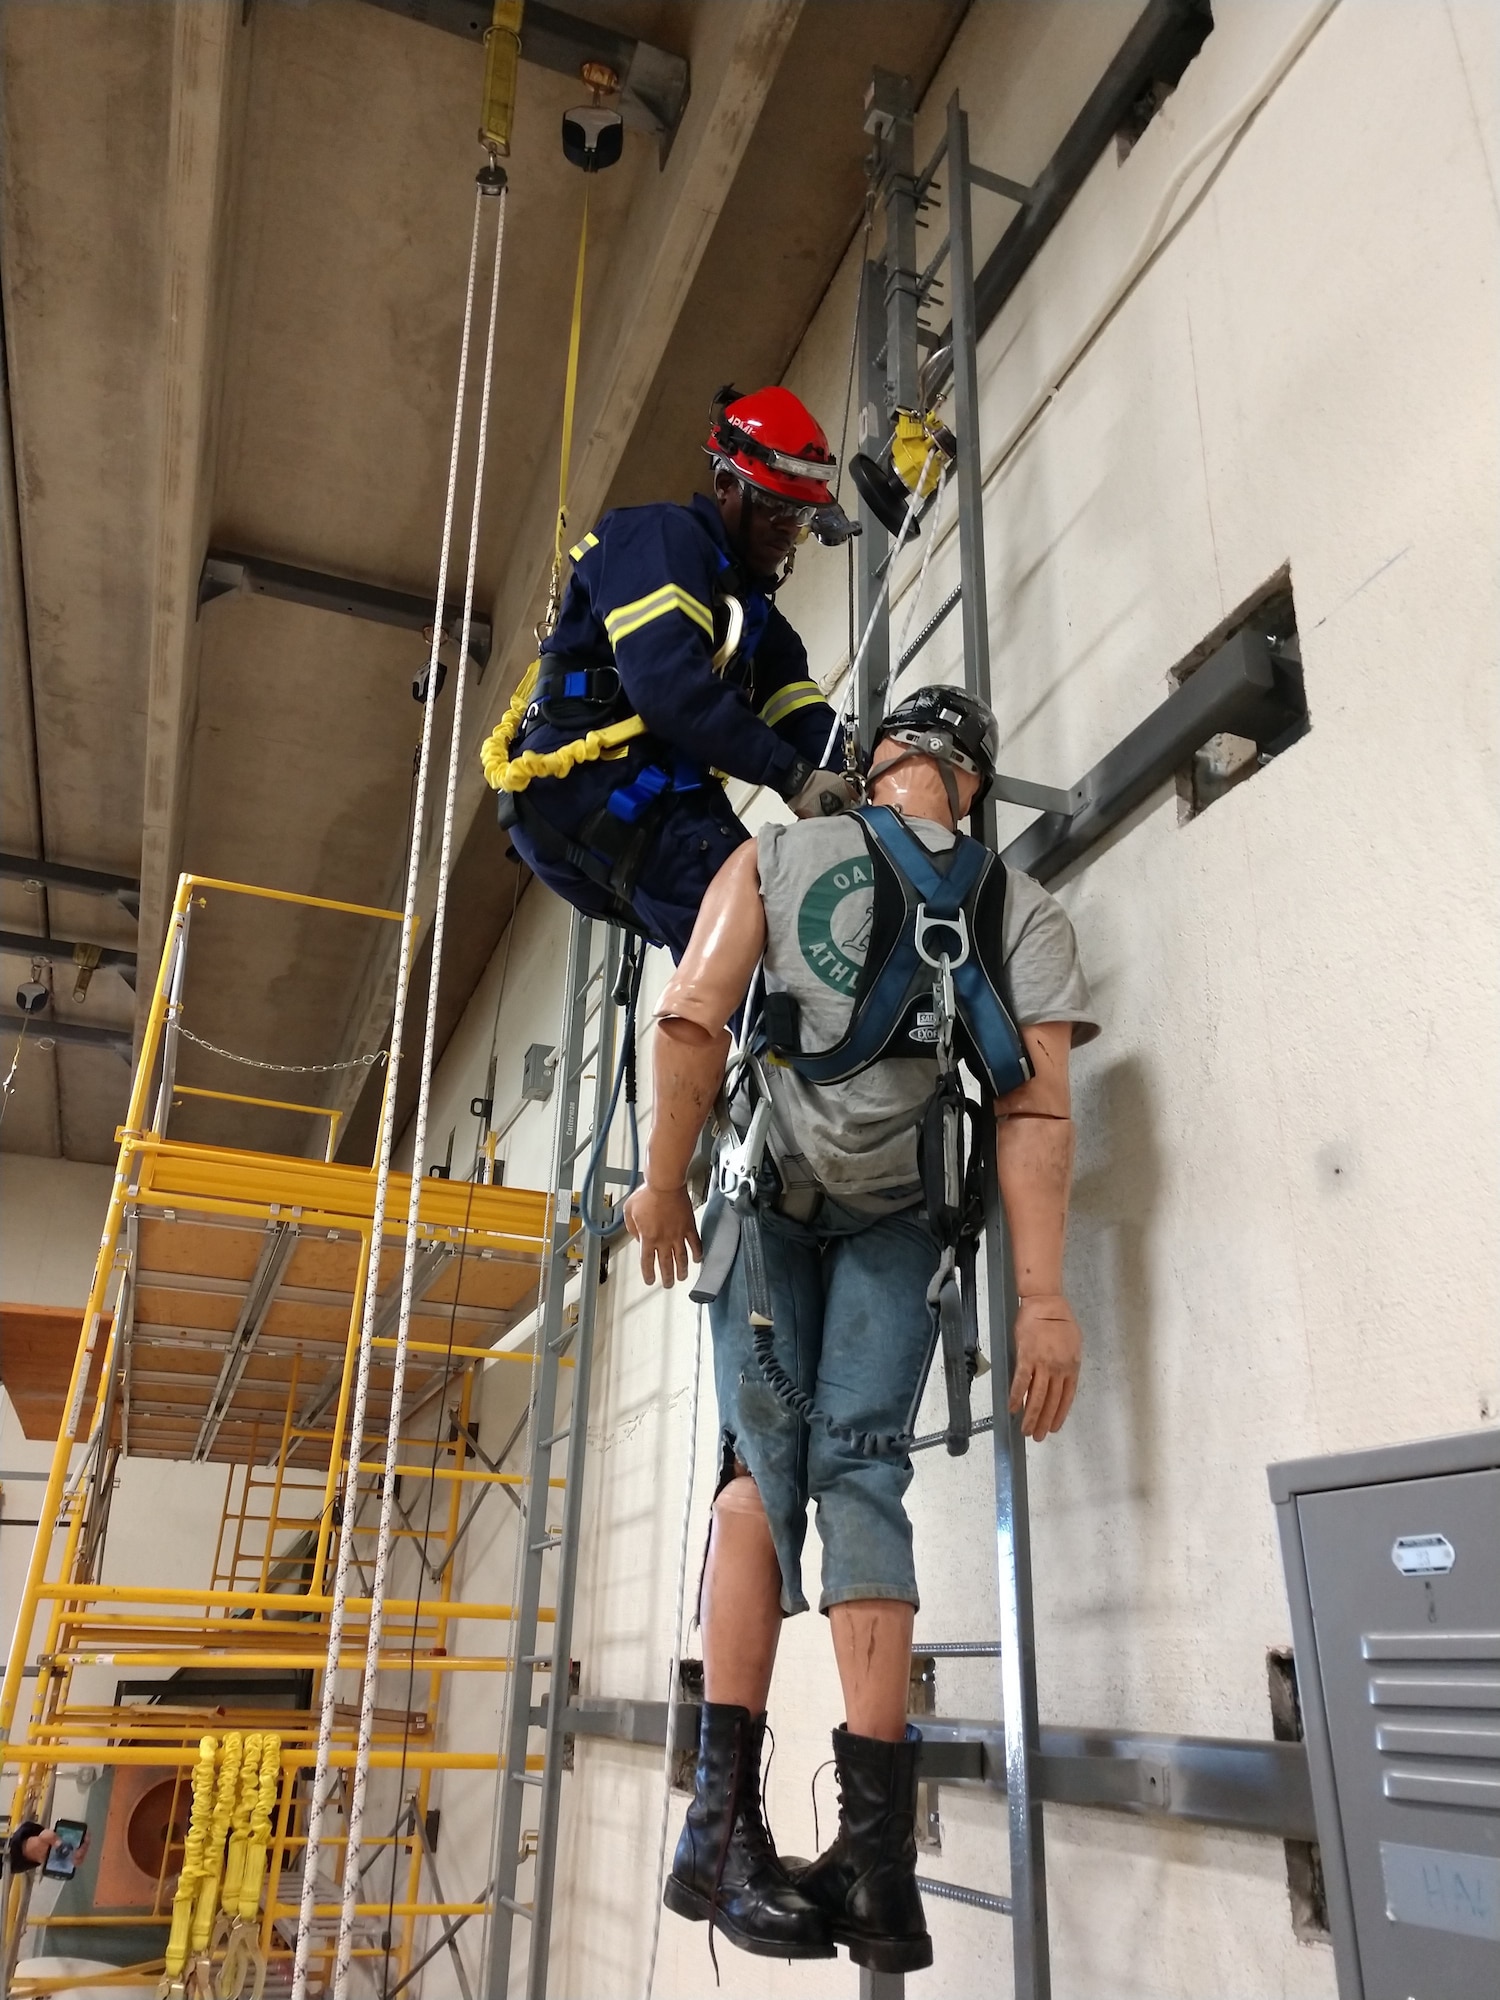 Senior Airman LeJarrell Evans, 90th Civil Engineer Squadron firefighter, preforms a ladder rescue at the Laramie County Community College Climb Safety Lab, Cheyenne, Wyo., June 5, 2018. F.E. Warren has three wind turbines located on base, however no one was certified in rescue and recovery. Four firefighters recently took a course through Laramie County Community College on the various stages of recovery on a wind turbine and received a two-year certification. (Courtesy Photo)